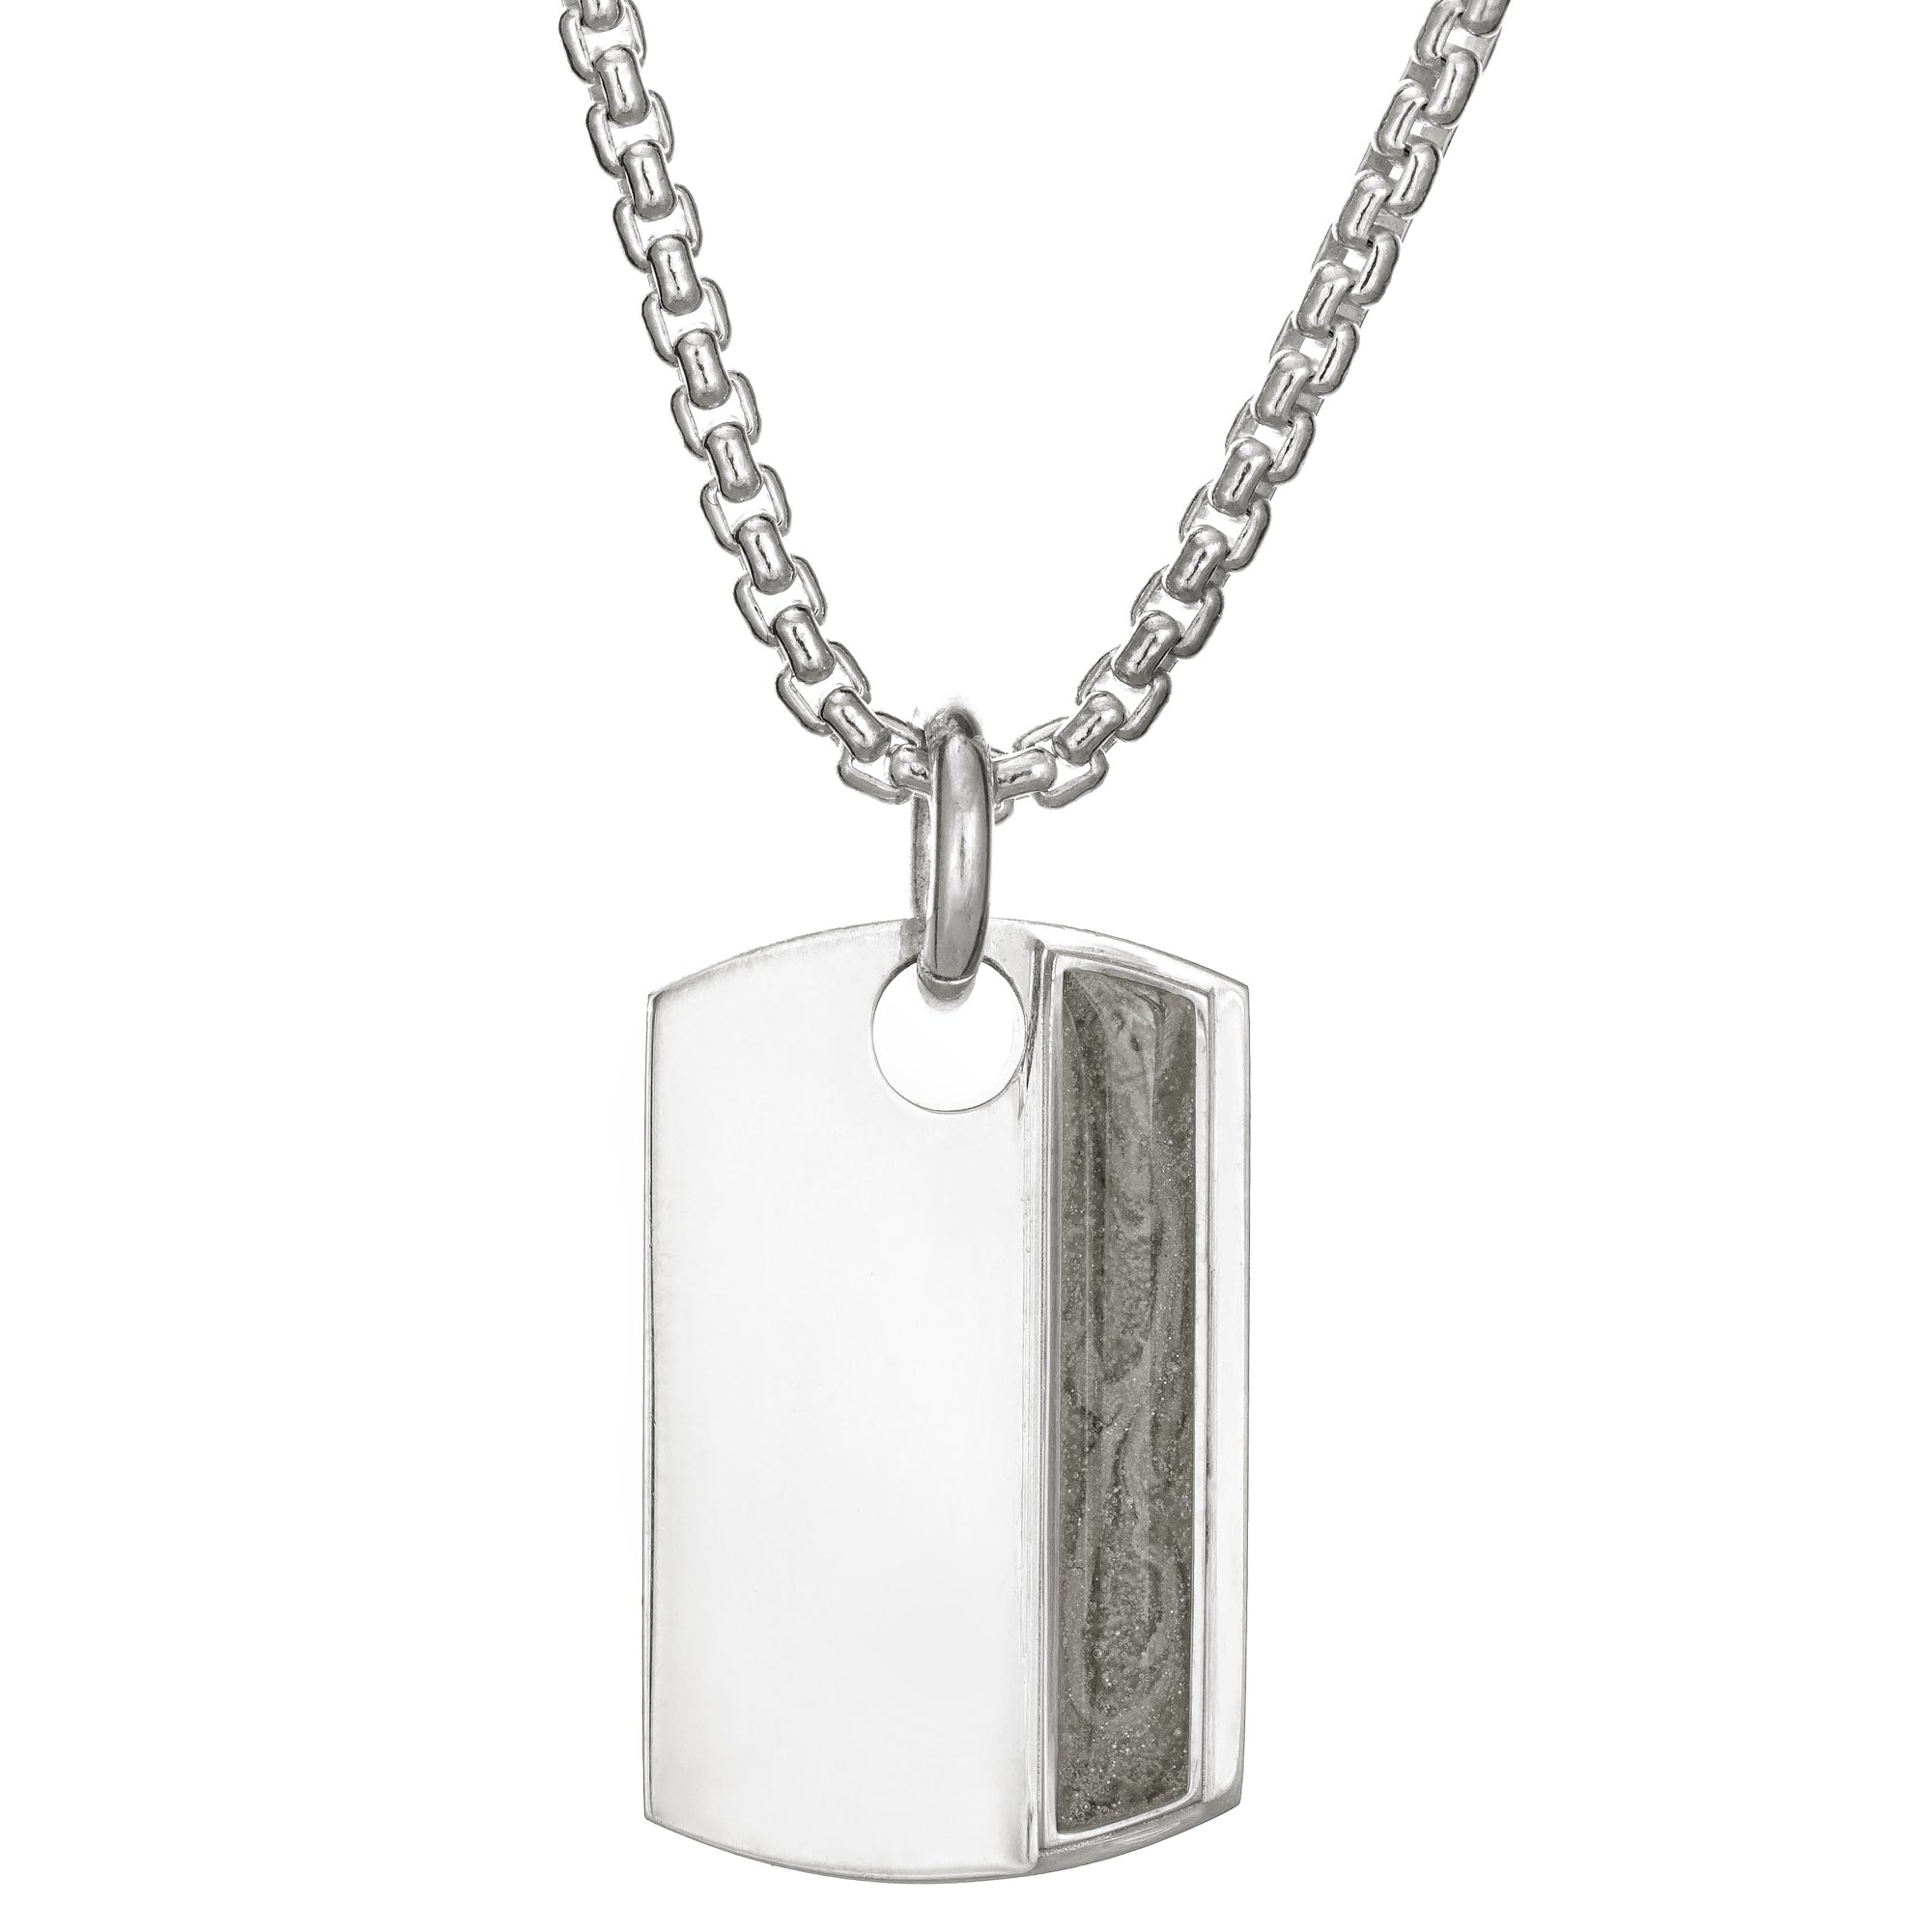 Men's Personalised Dog Tag Necklace in Solid Sterling Silver